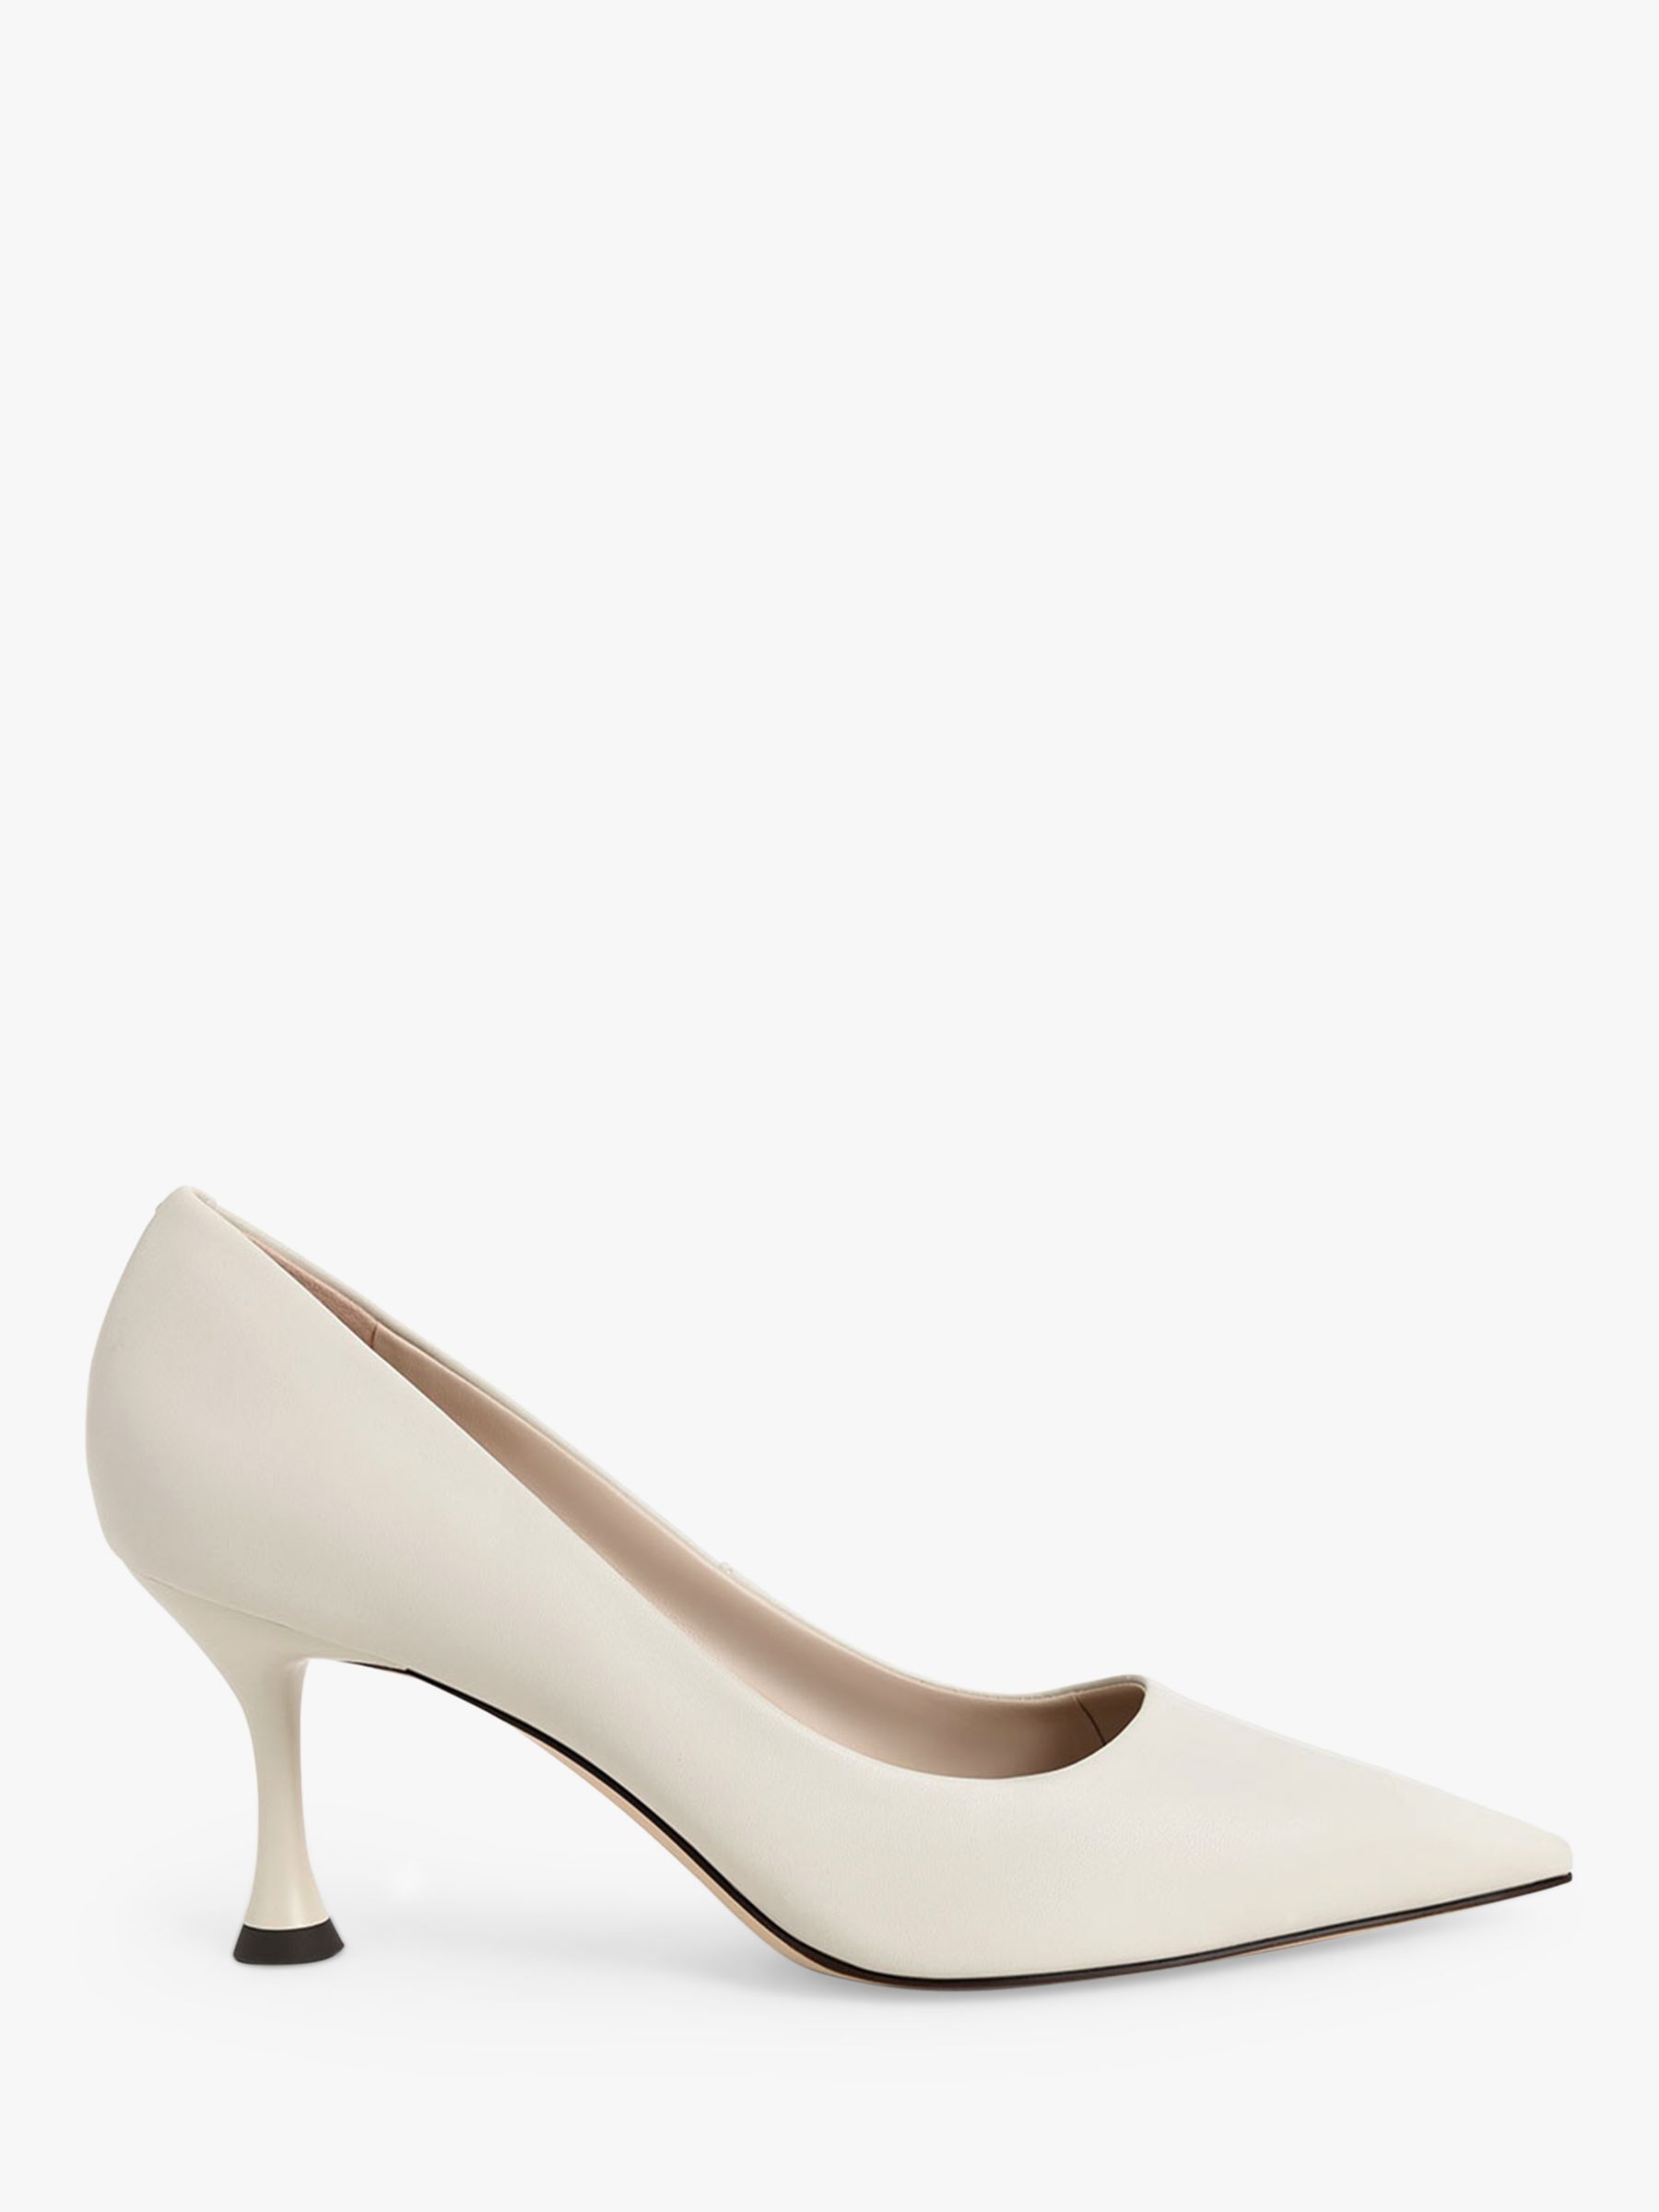 CHARLES & KEITH Spool Heel Court Shoes, Black at John Lewis & Partners